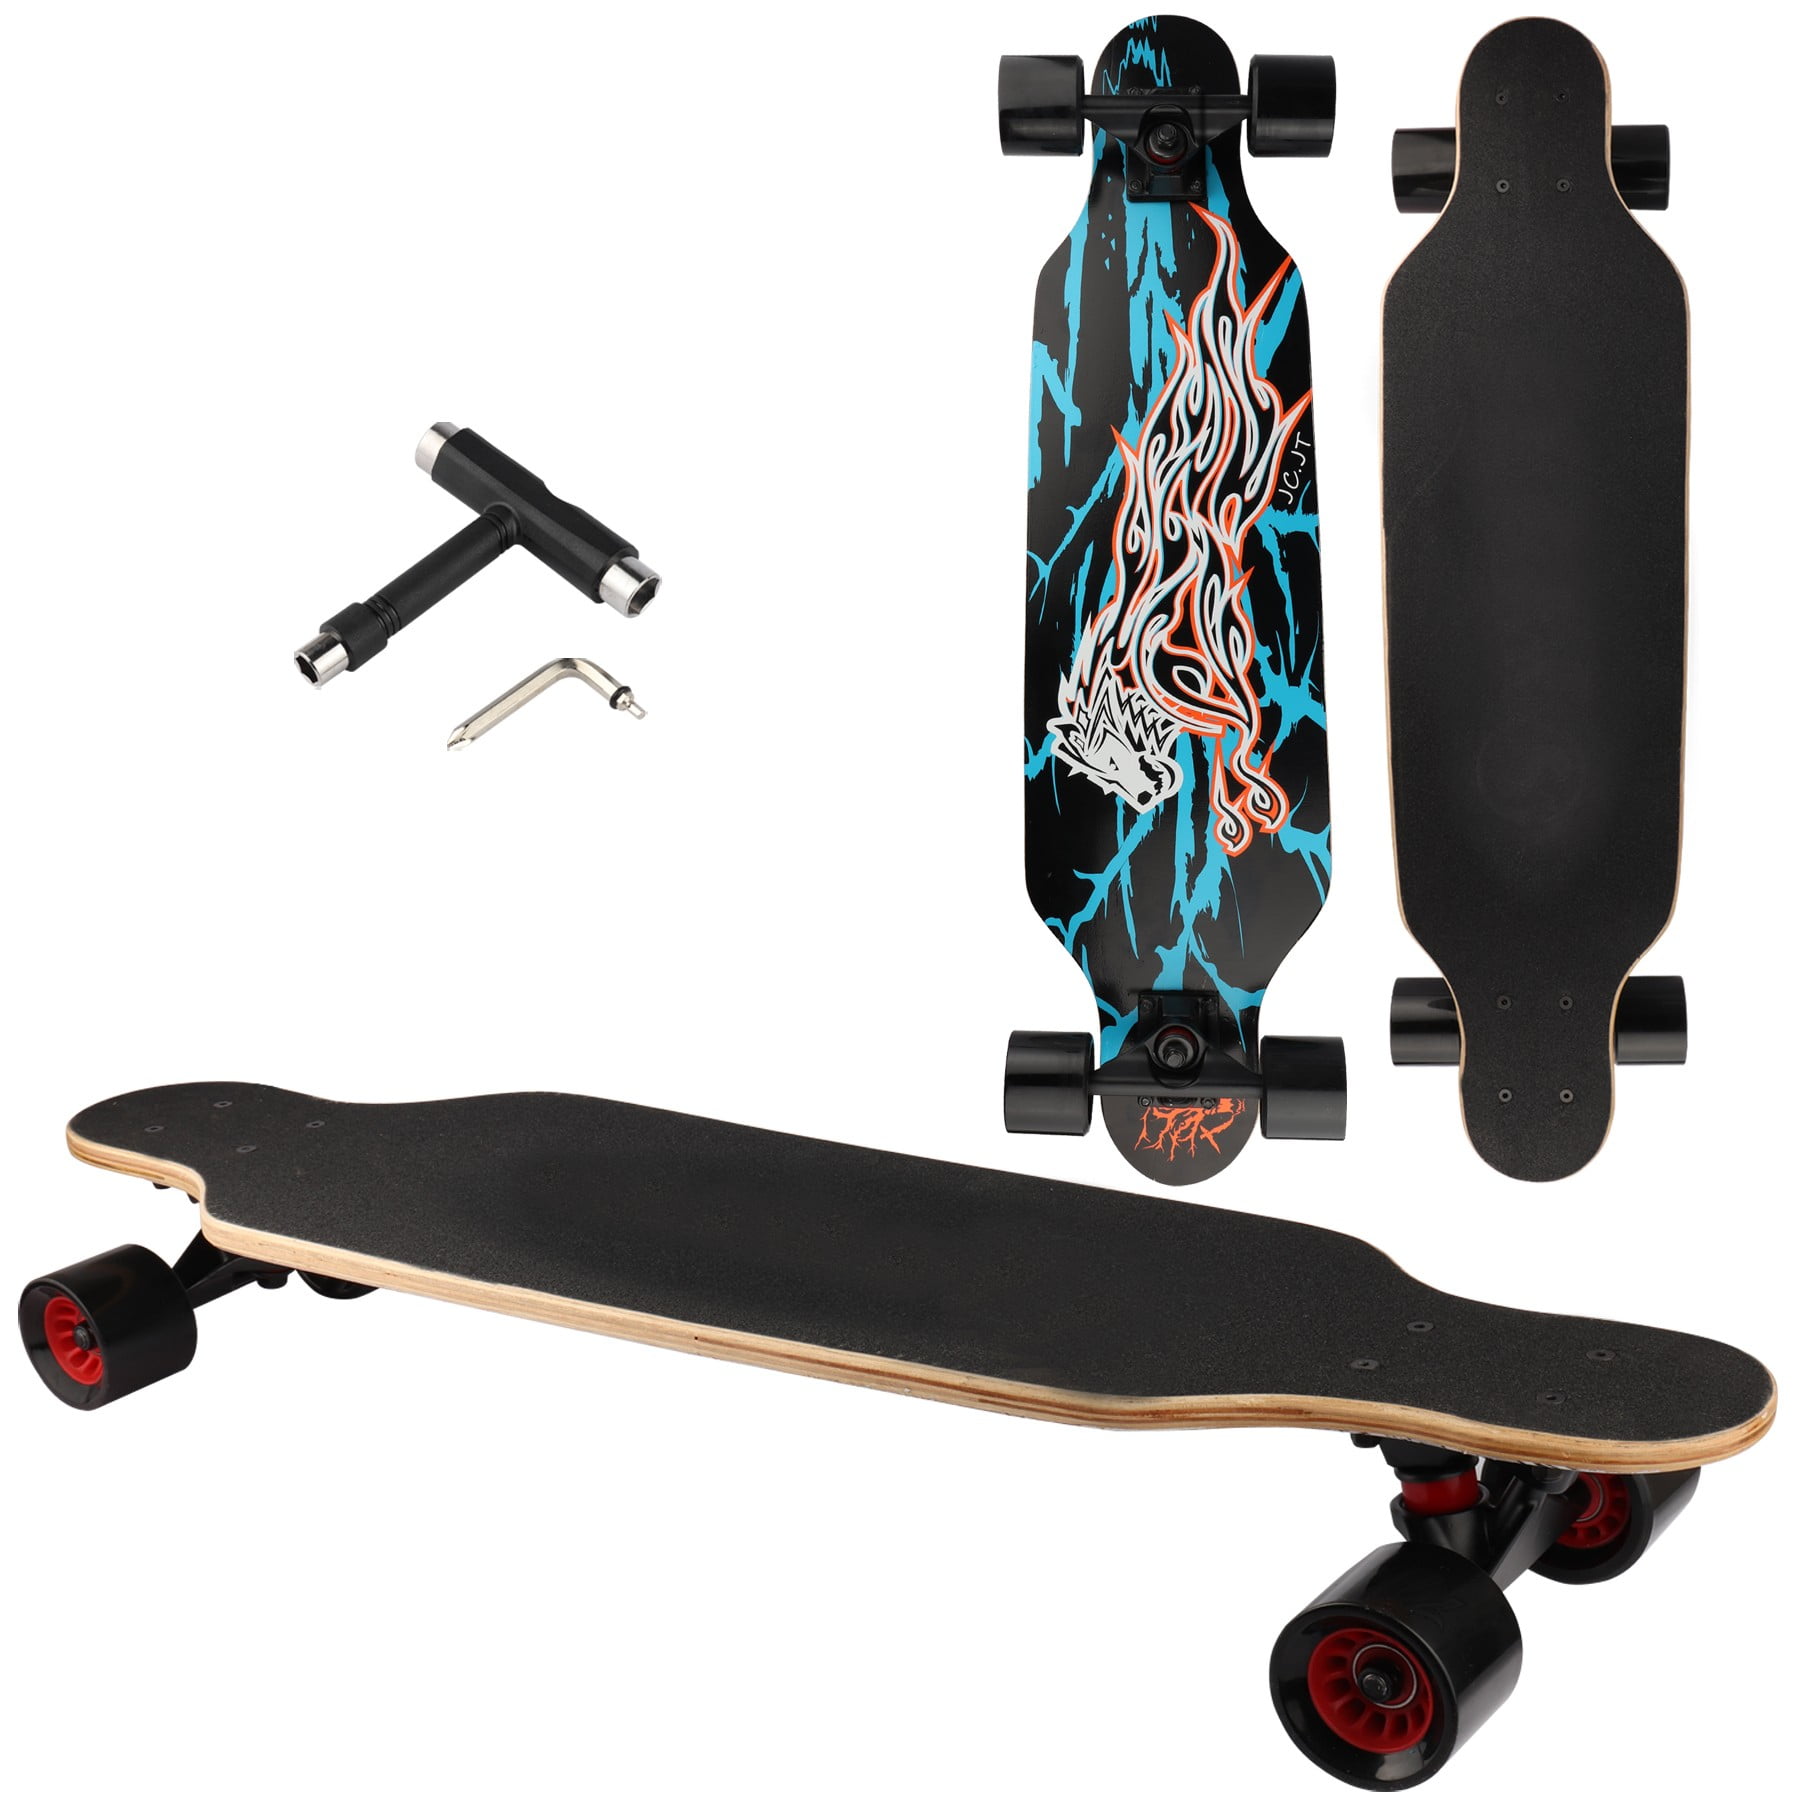 frekvens Gangster Fange Longboard Skateboard Complete Cruiser, 31 inch Small Pro Longboards with  T-Tool for Cruising, Carving, Freestyle and Downhill (Skull) - Walmart.com